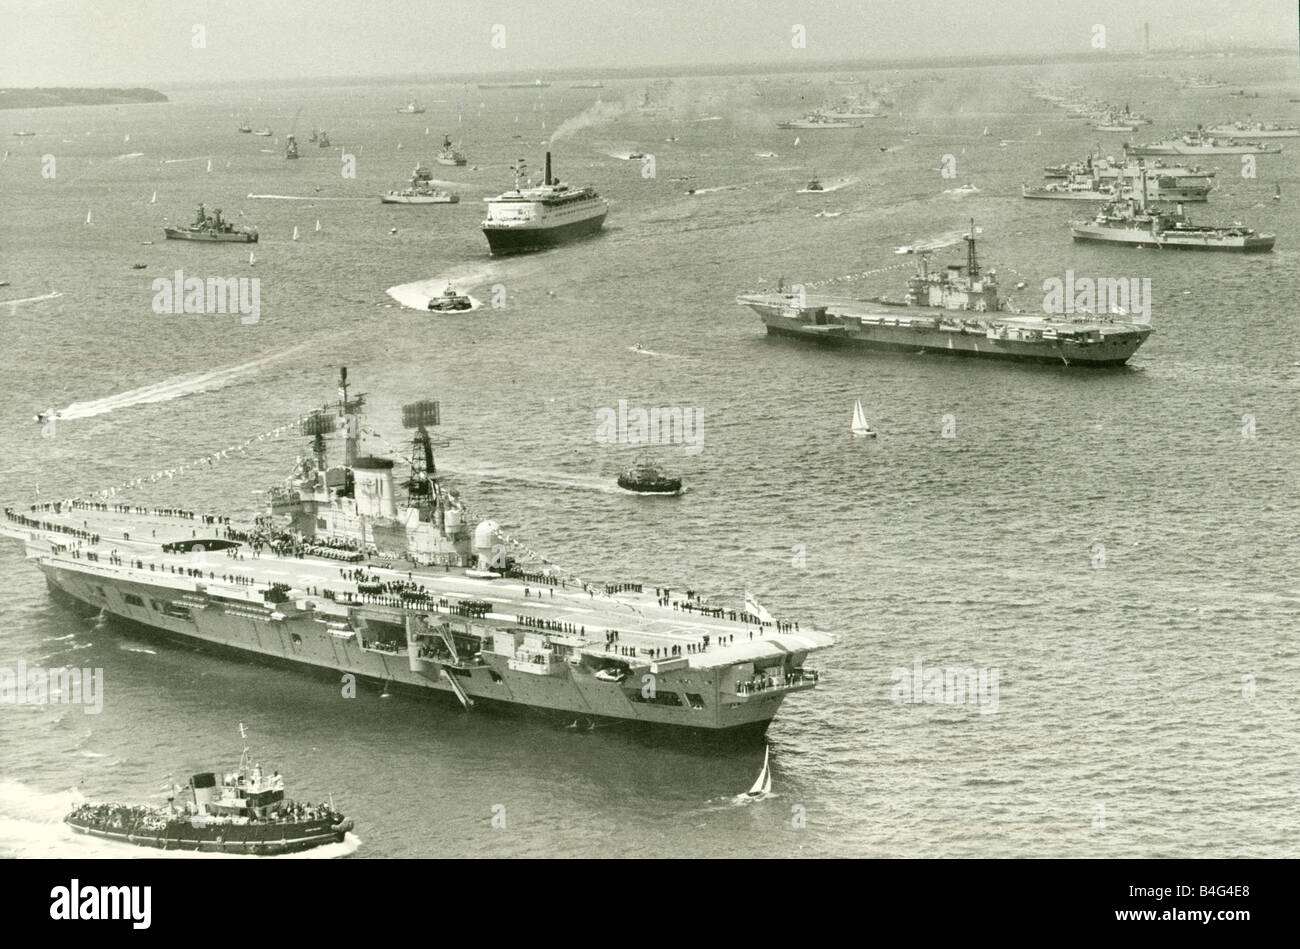 The Cunard liner QEII cruises through the fleet of Royal Navy ships gather at Spithead for the Queens silver jubilee review In the foreground the Aircraft Carriers HMS Ark Royal and HMS Hermes June 1977 Stock Photo